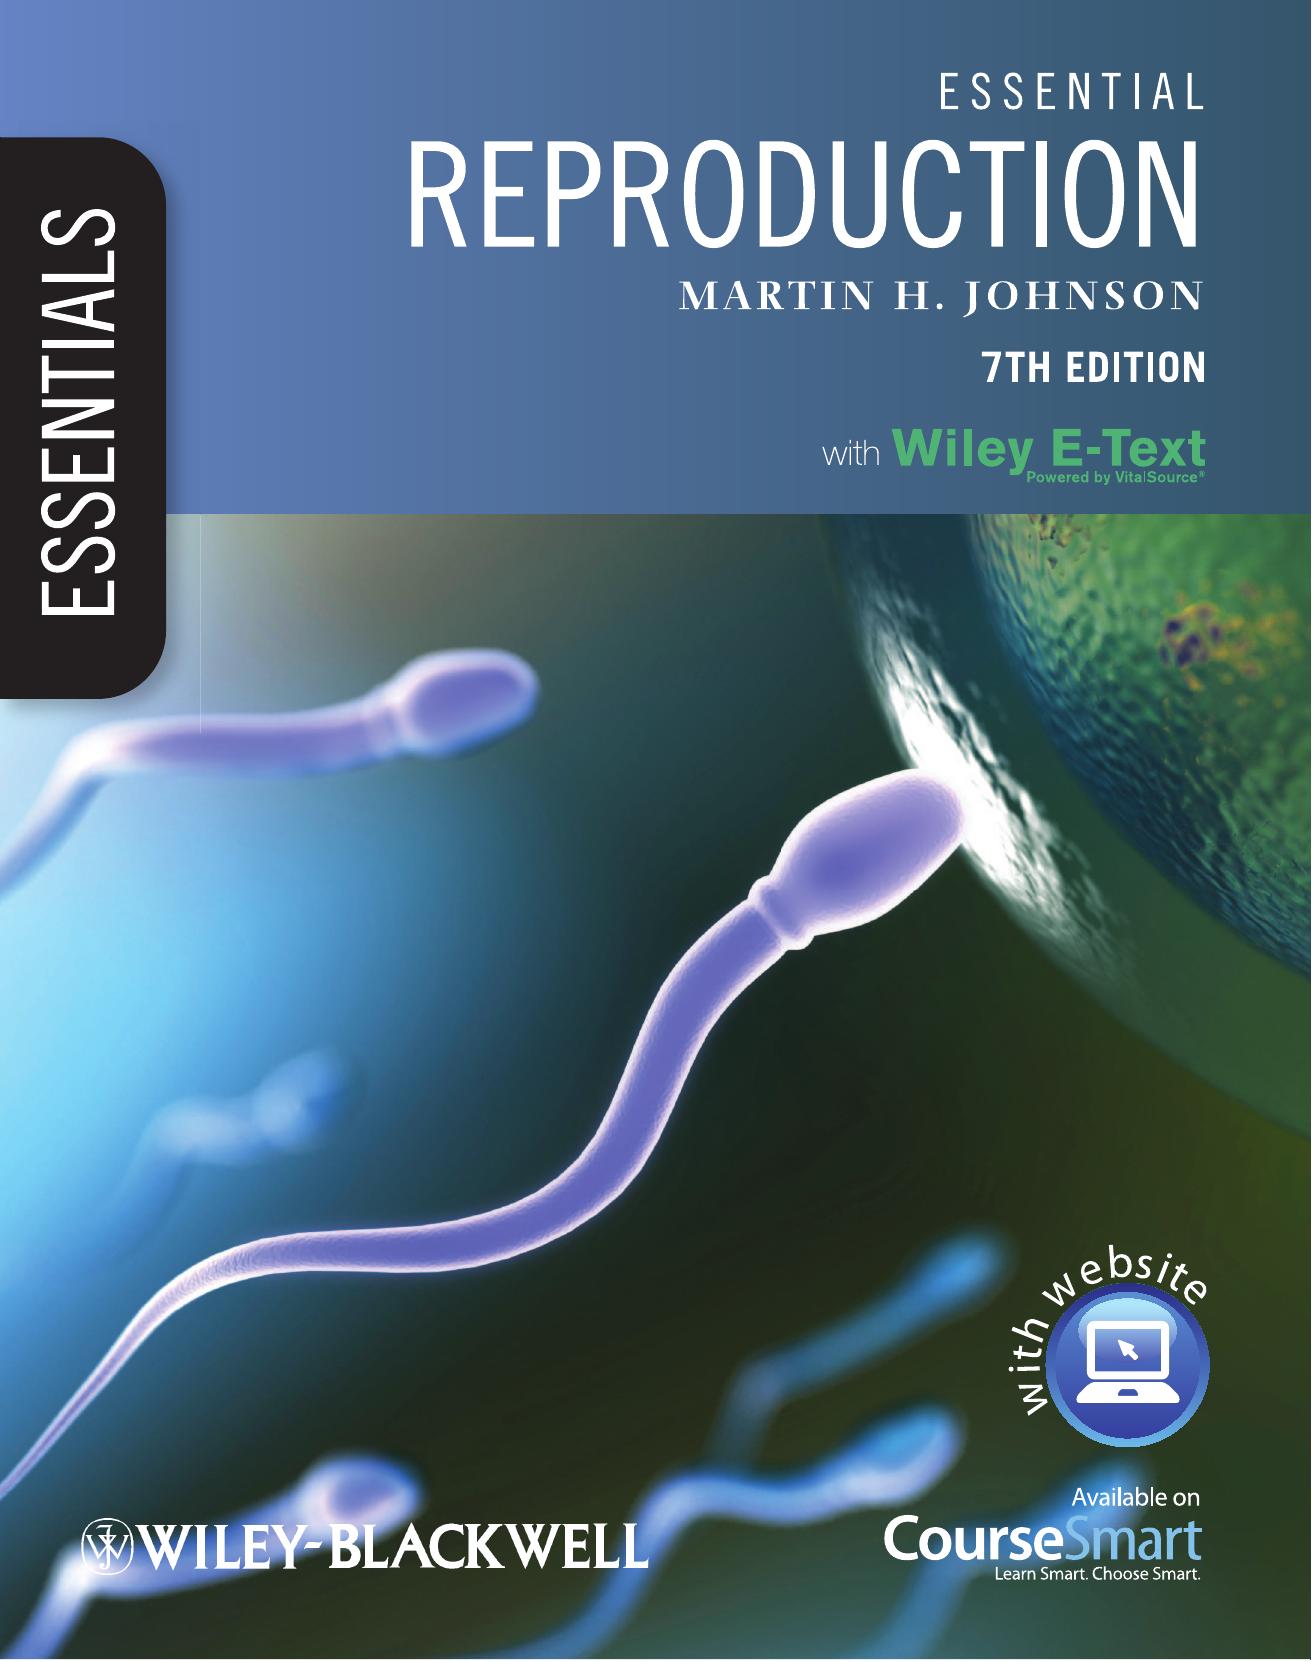 Essential Reproduction, 7th Edition